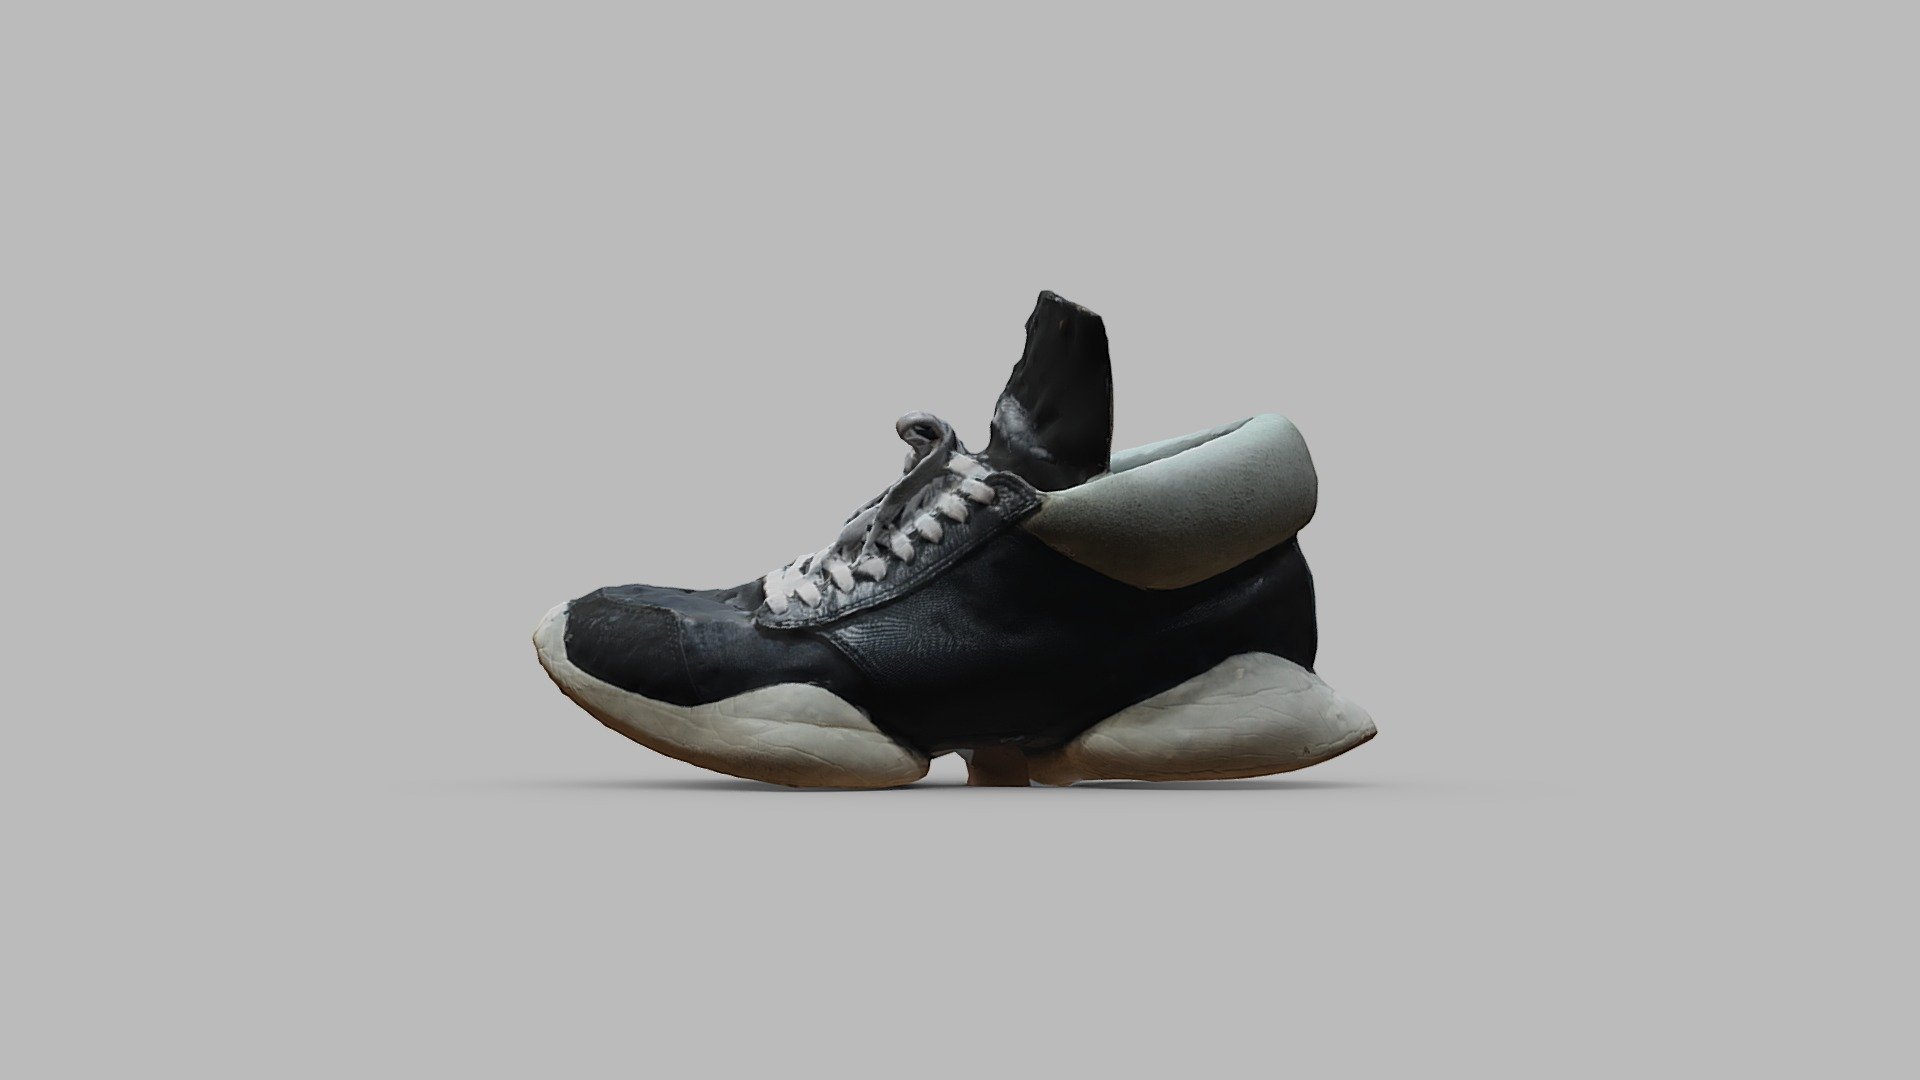 Scanned using PhotoCatch and 63 photos - Adidas Rick Owens Tech Runner - 3D model by rtql8d 3d model